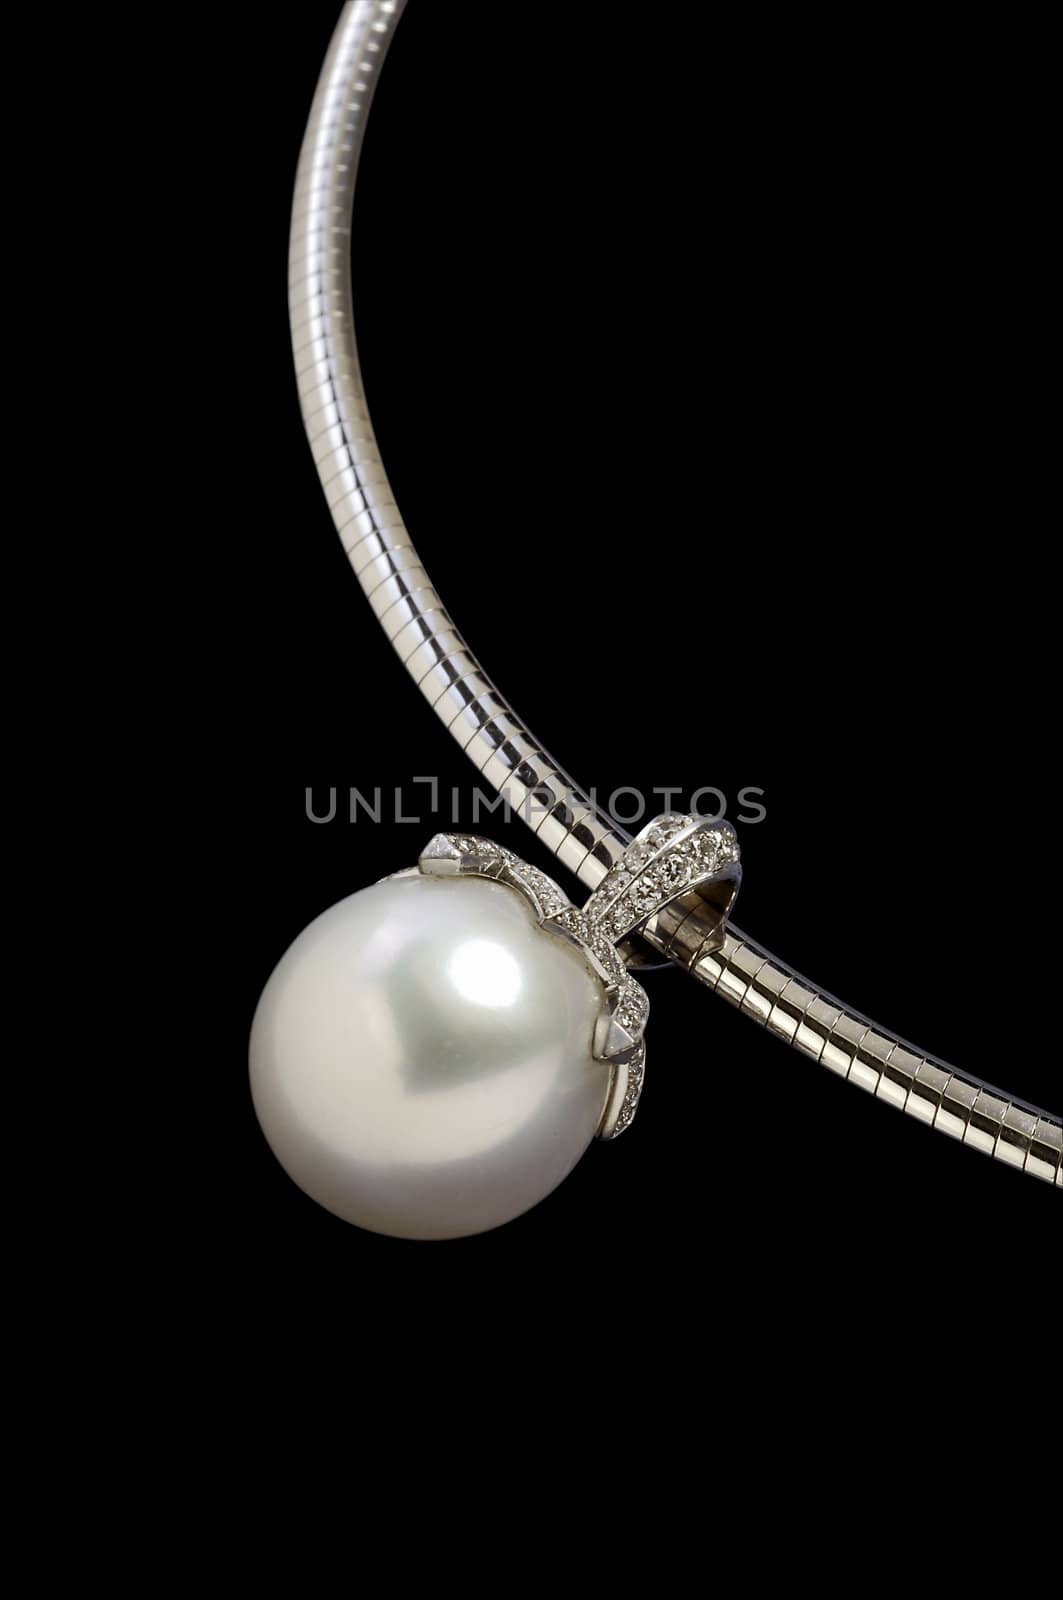 Beautiful necklace with pearl by pbombaert